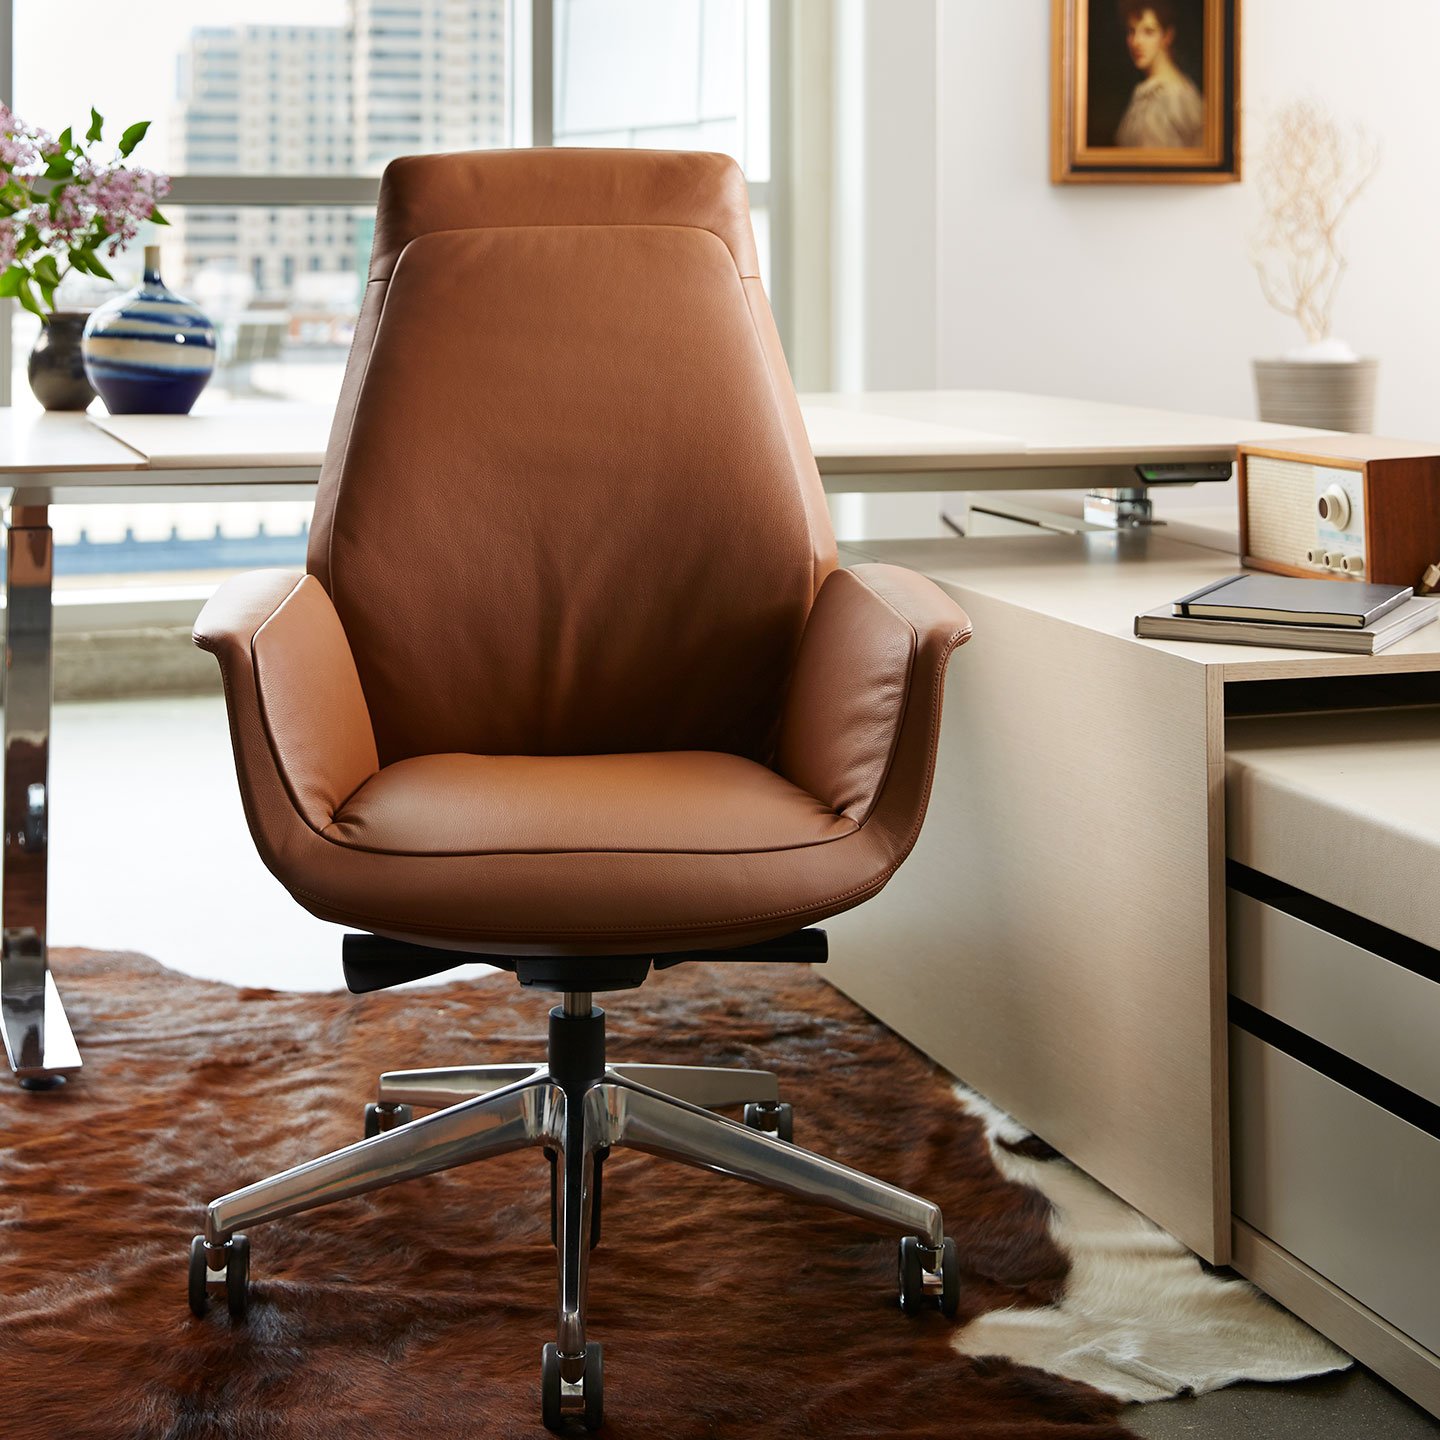 Haworth Downtown chair in tan leather in a office cabin